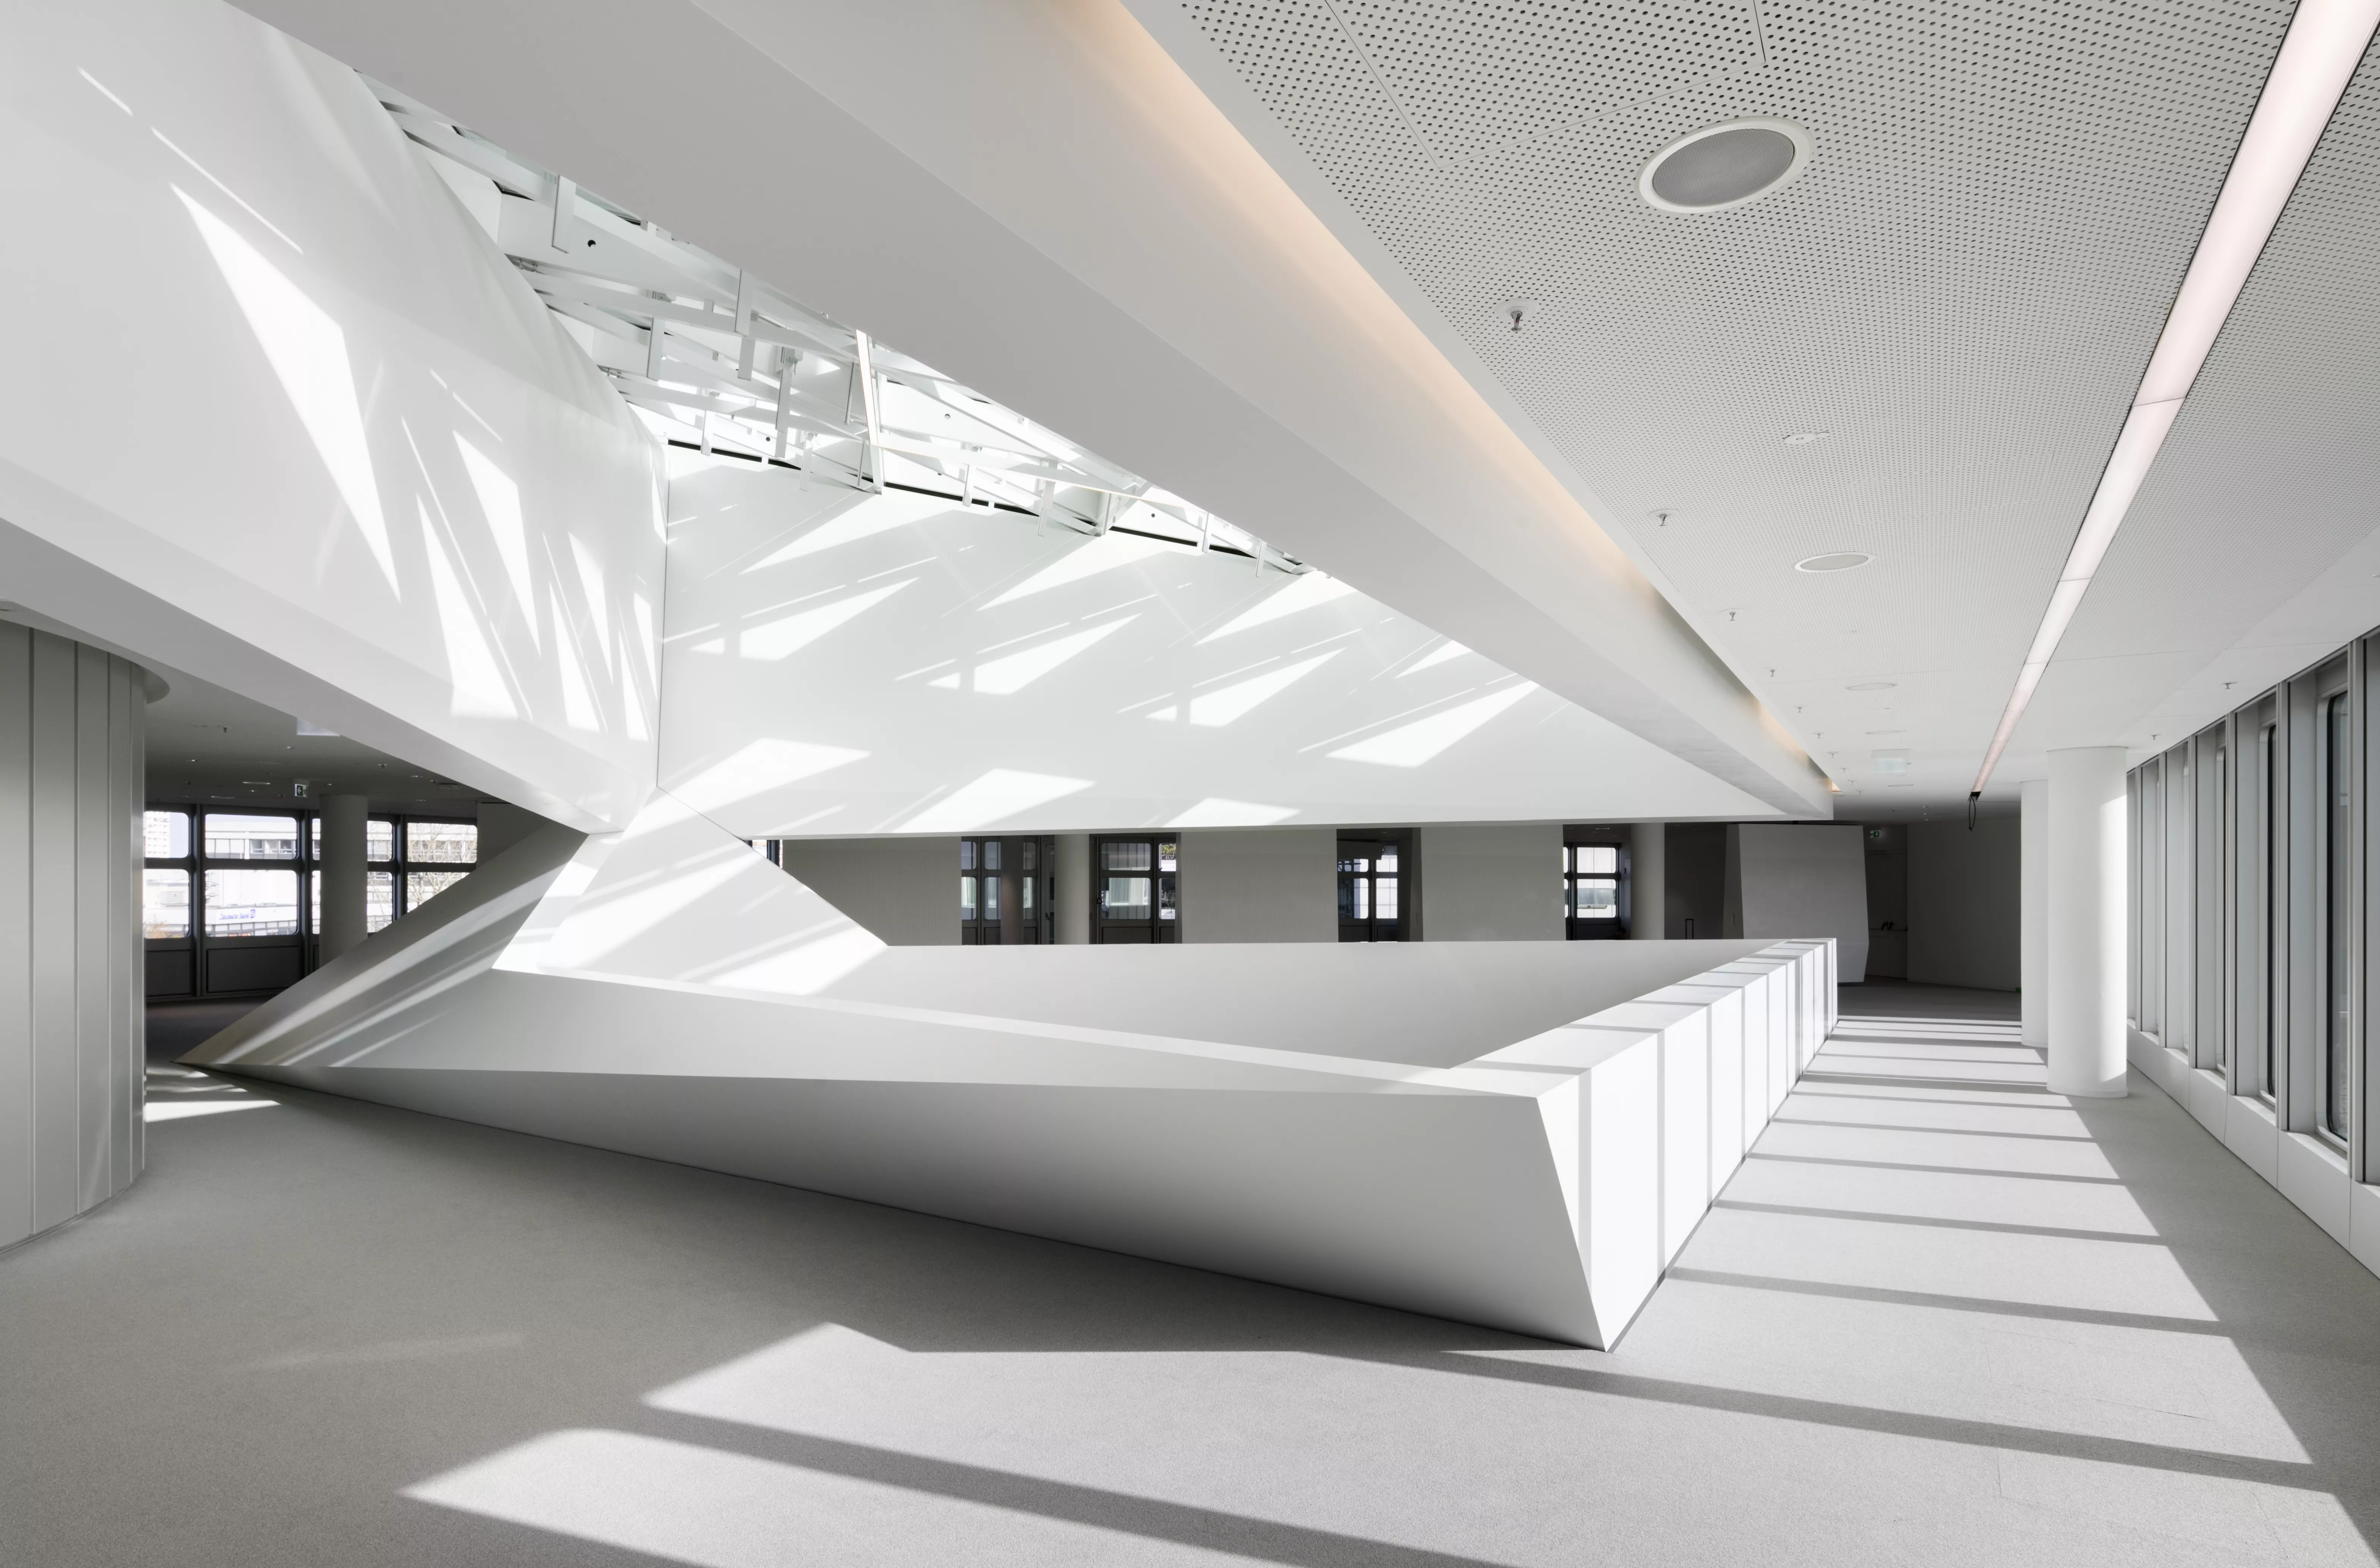 A new geometric dimension: The polygonal HIMACS structure in Munich's HVB-Tower